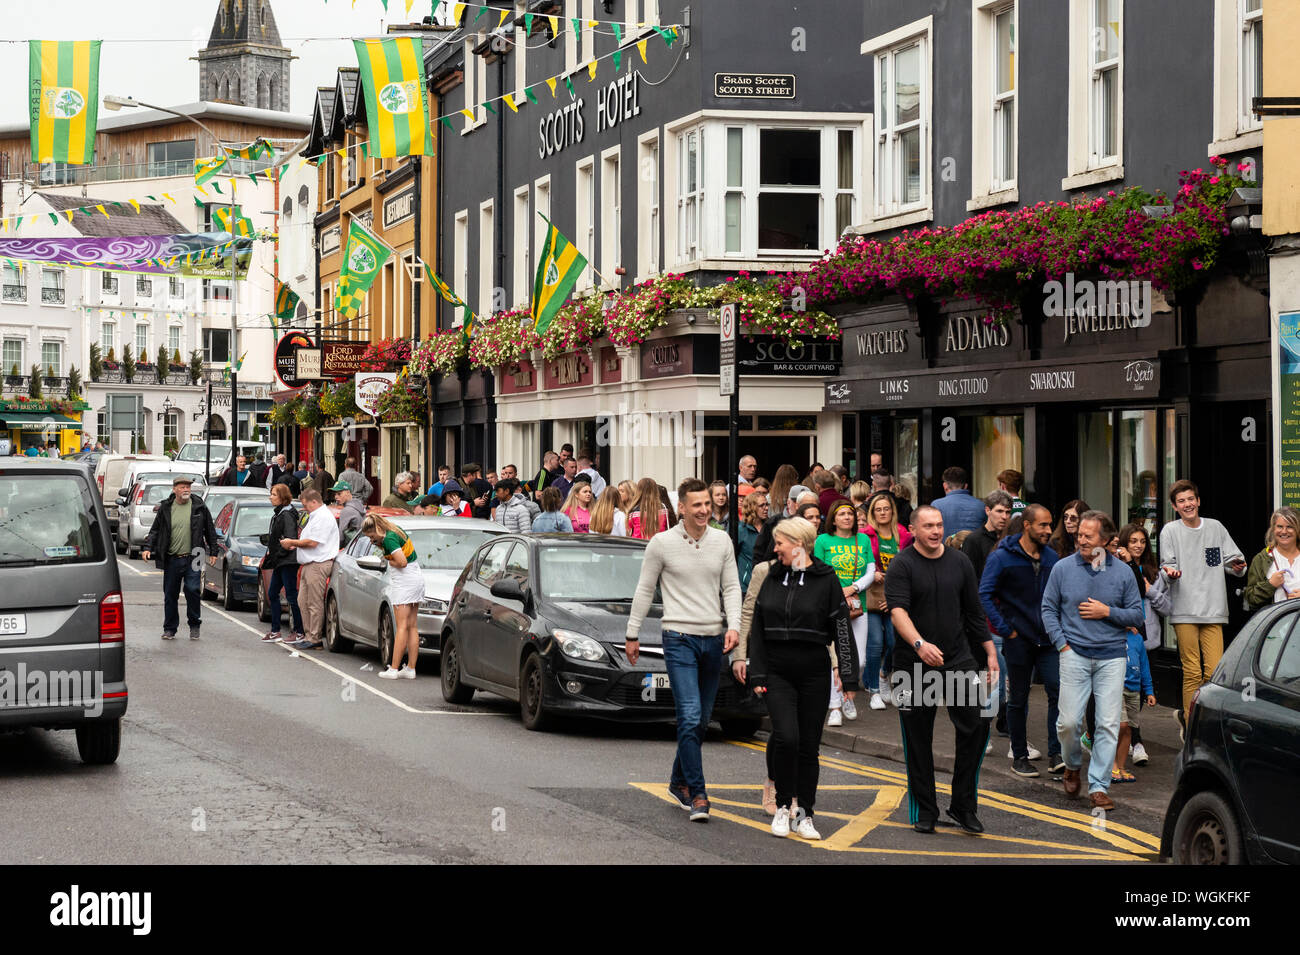 Killarney match day and crowd of people GAA football supporters in College Street Killarney, County Kerry, Ireland Stock Photo